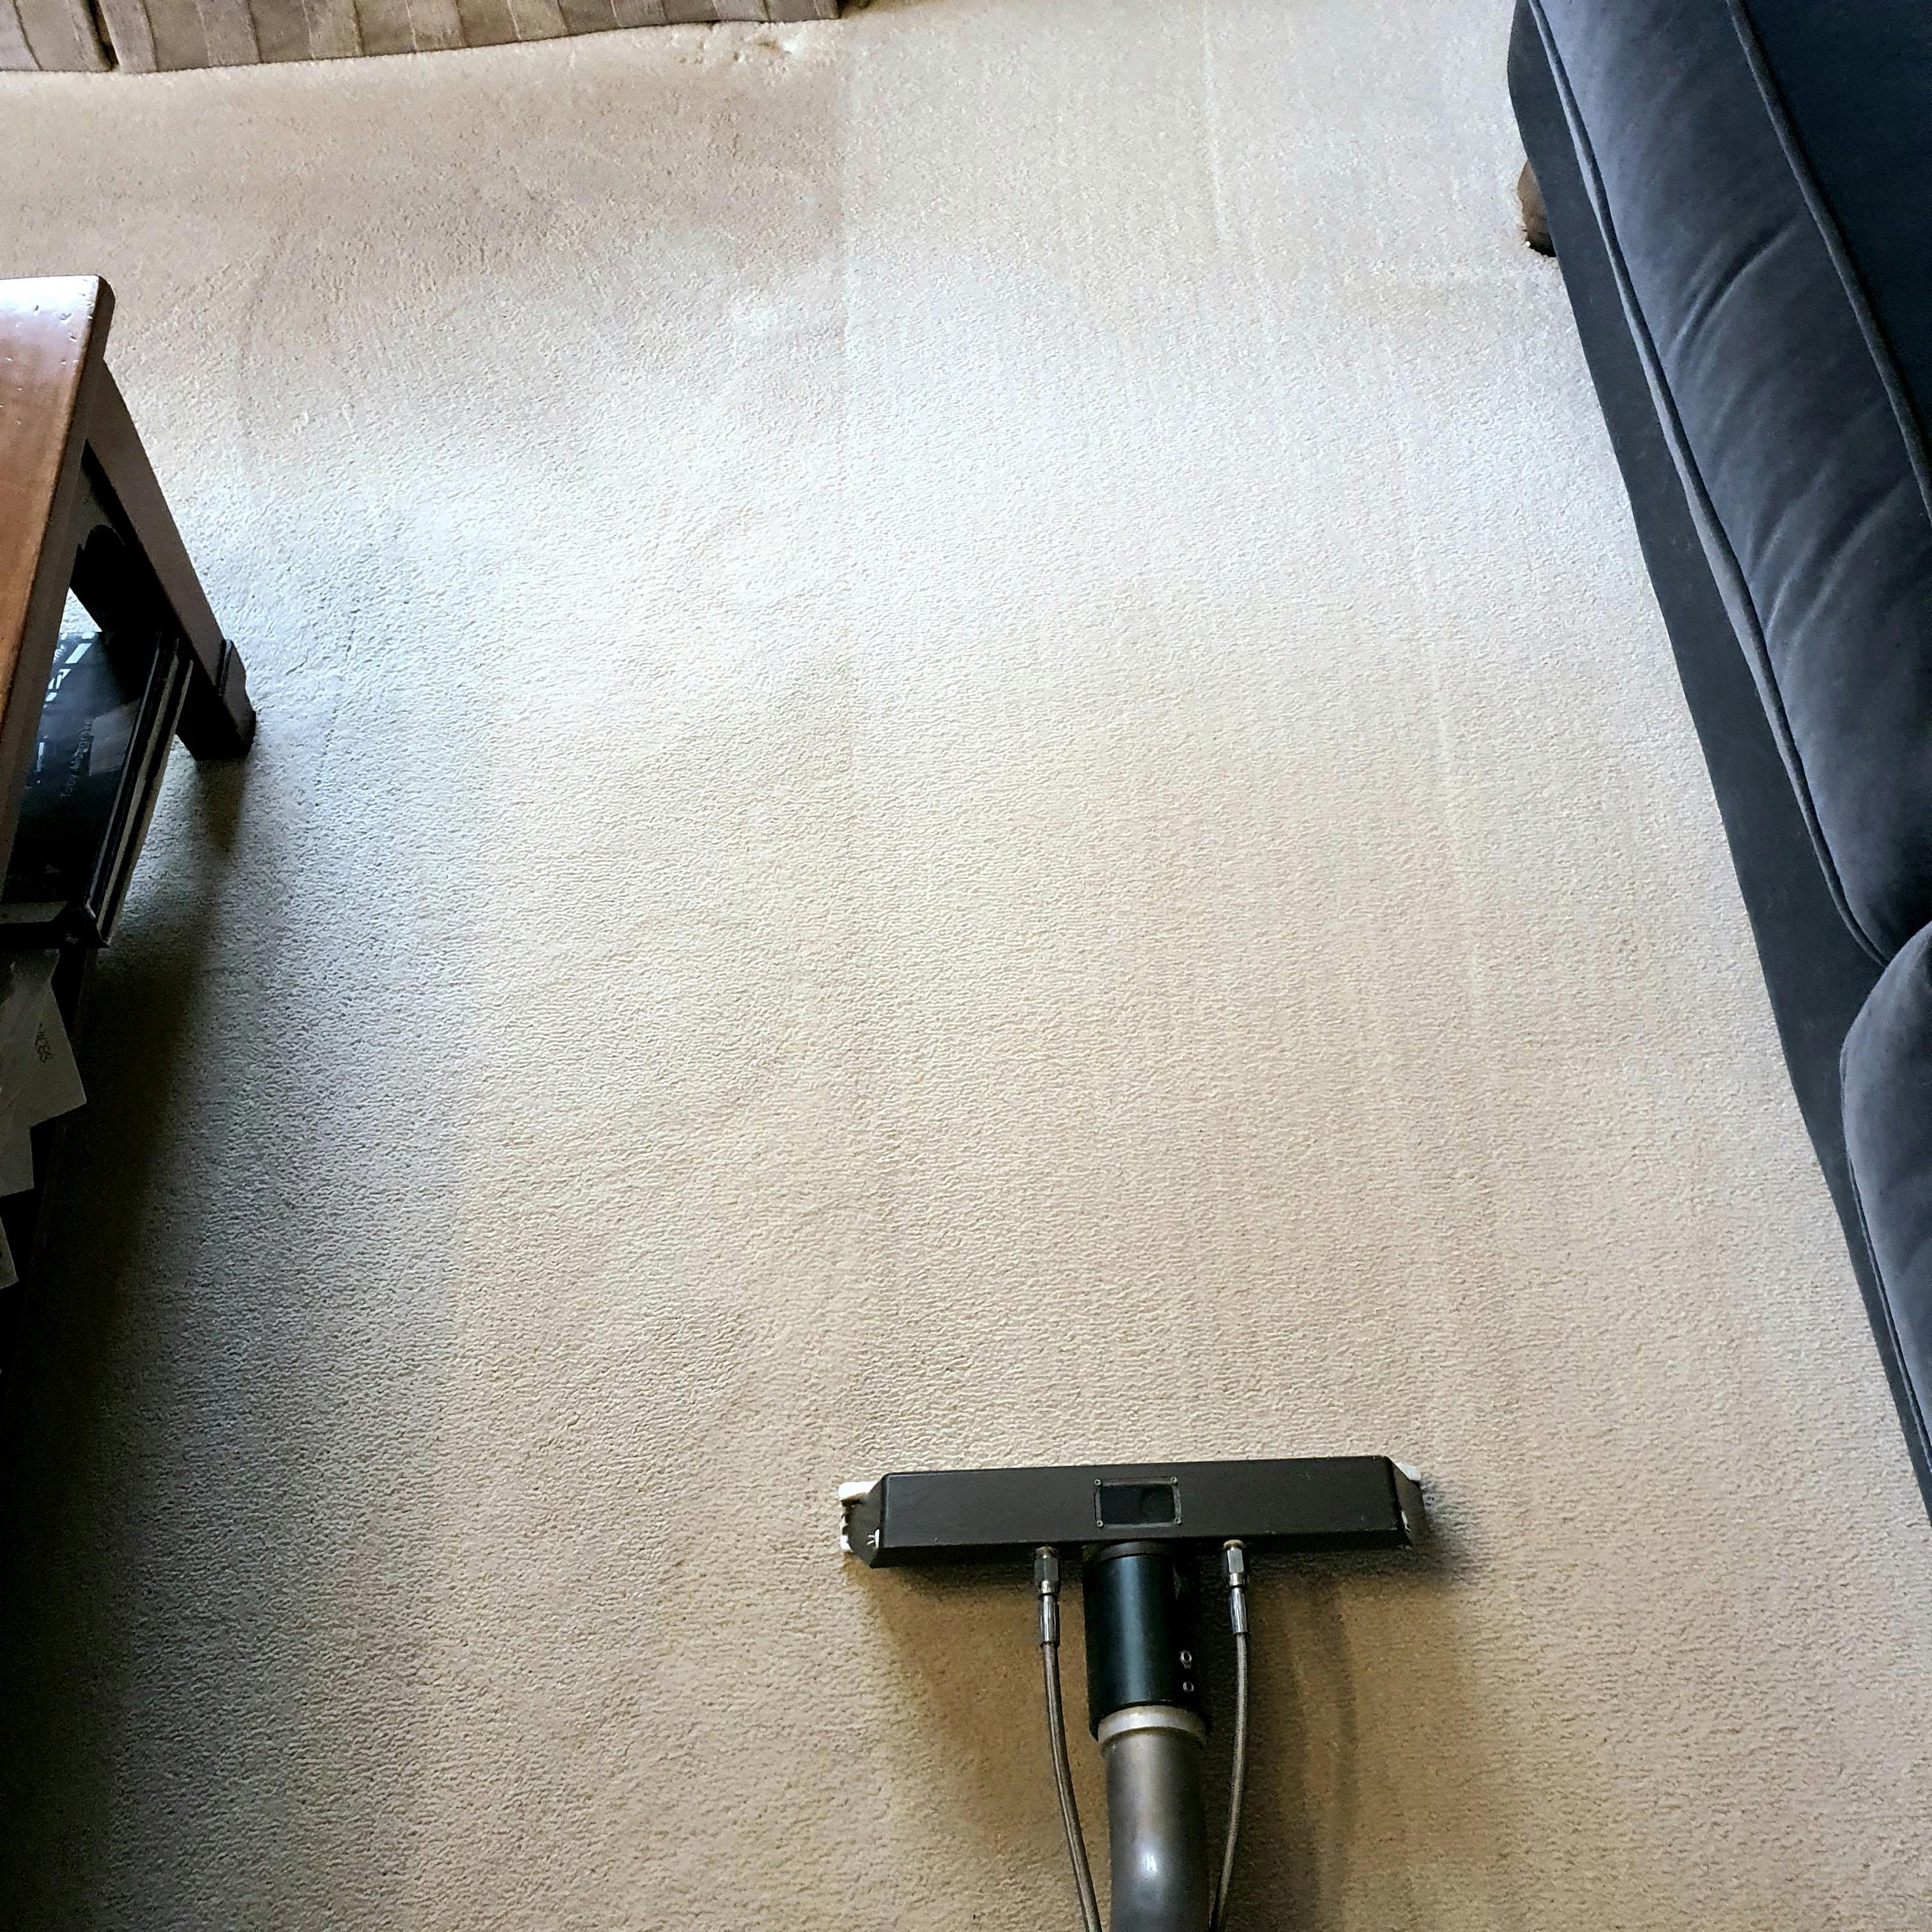 Professional carpet cleaning in Henley-on-Thames 